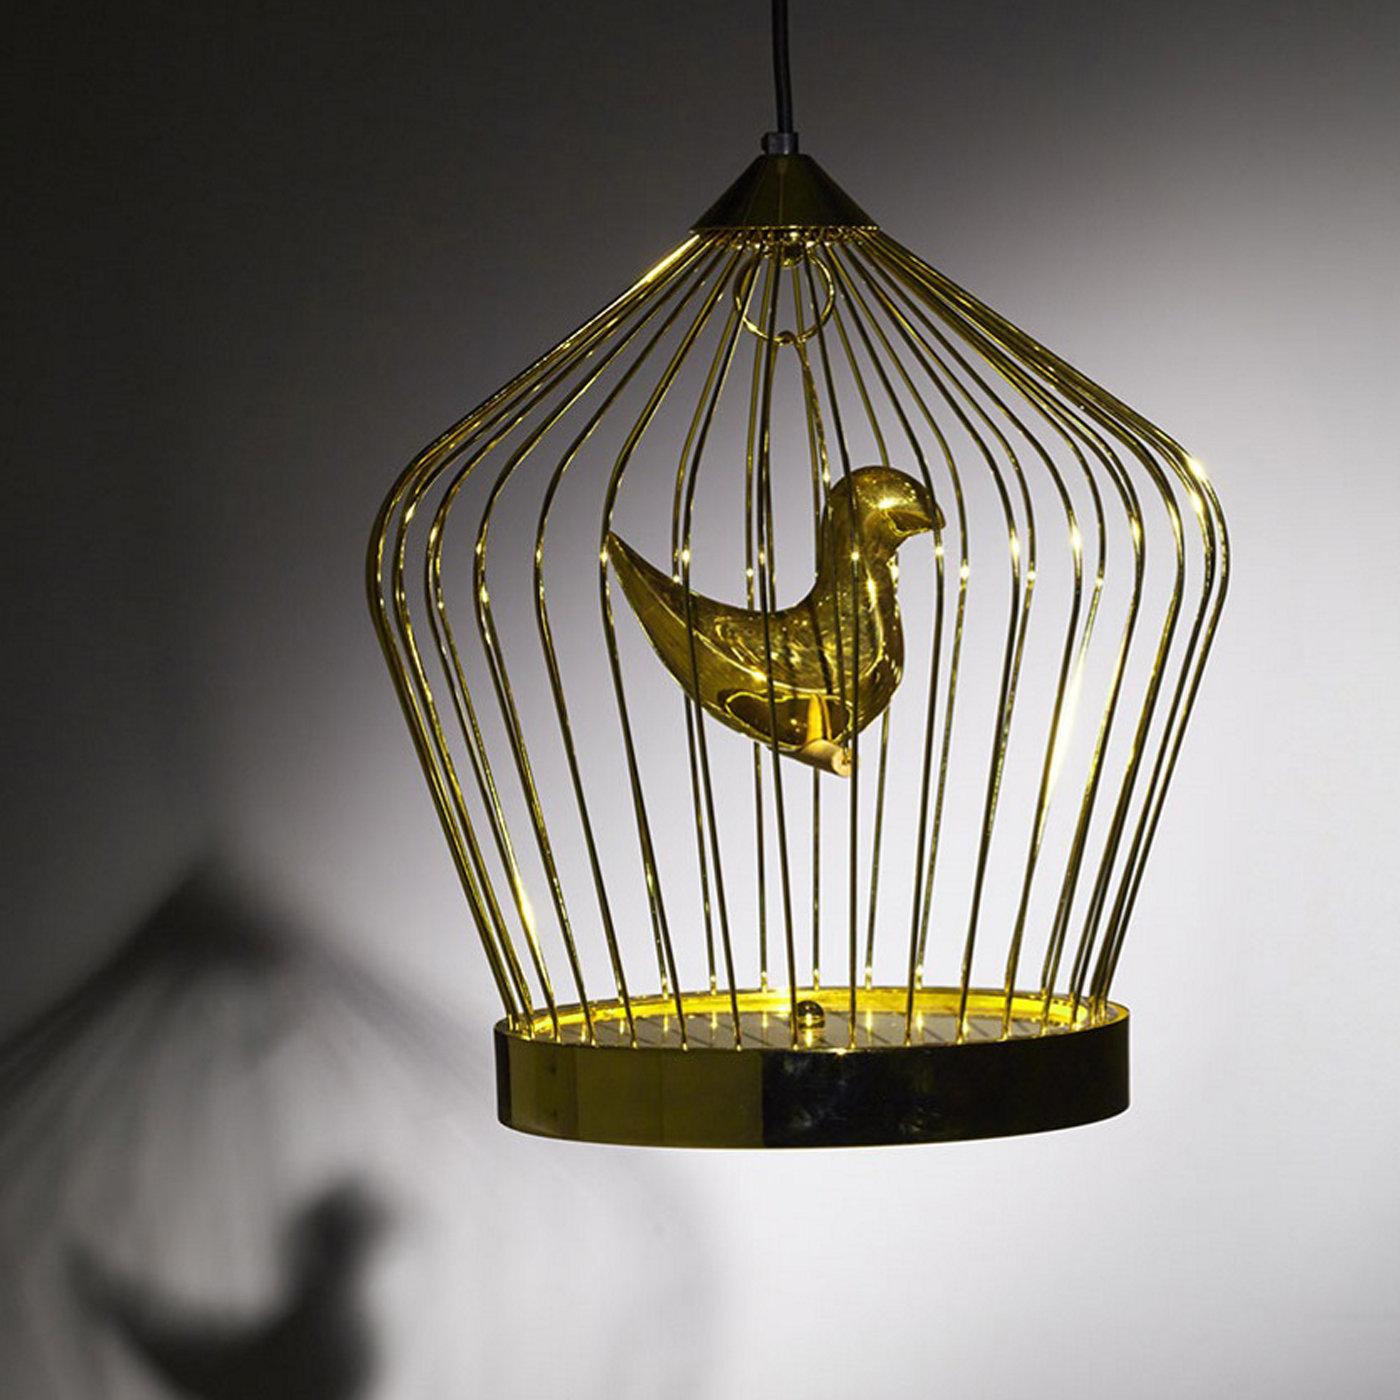 This refined and whimsical suspension lamp by Jake Phipps is available both in 24-karat gold plating (featured) and black-painted metal, as well as in two sizes. A modern revisitation of popular practice of keeping canary birds in ornate cages at